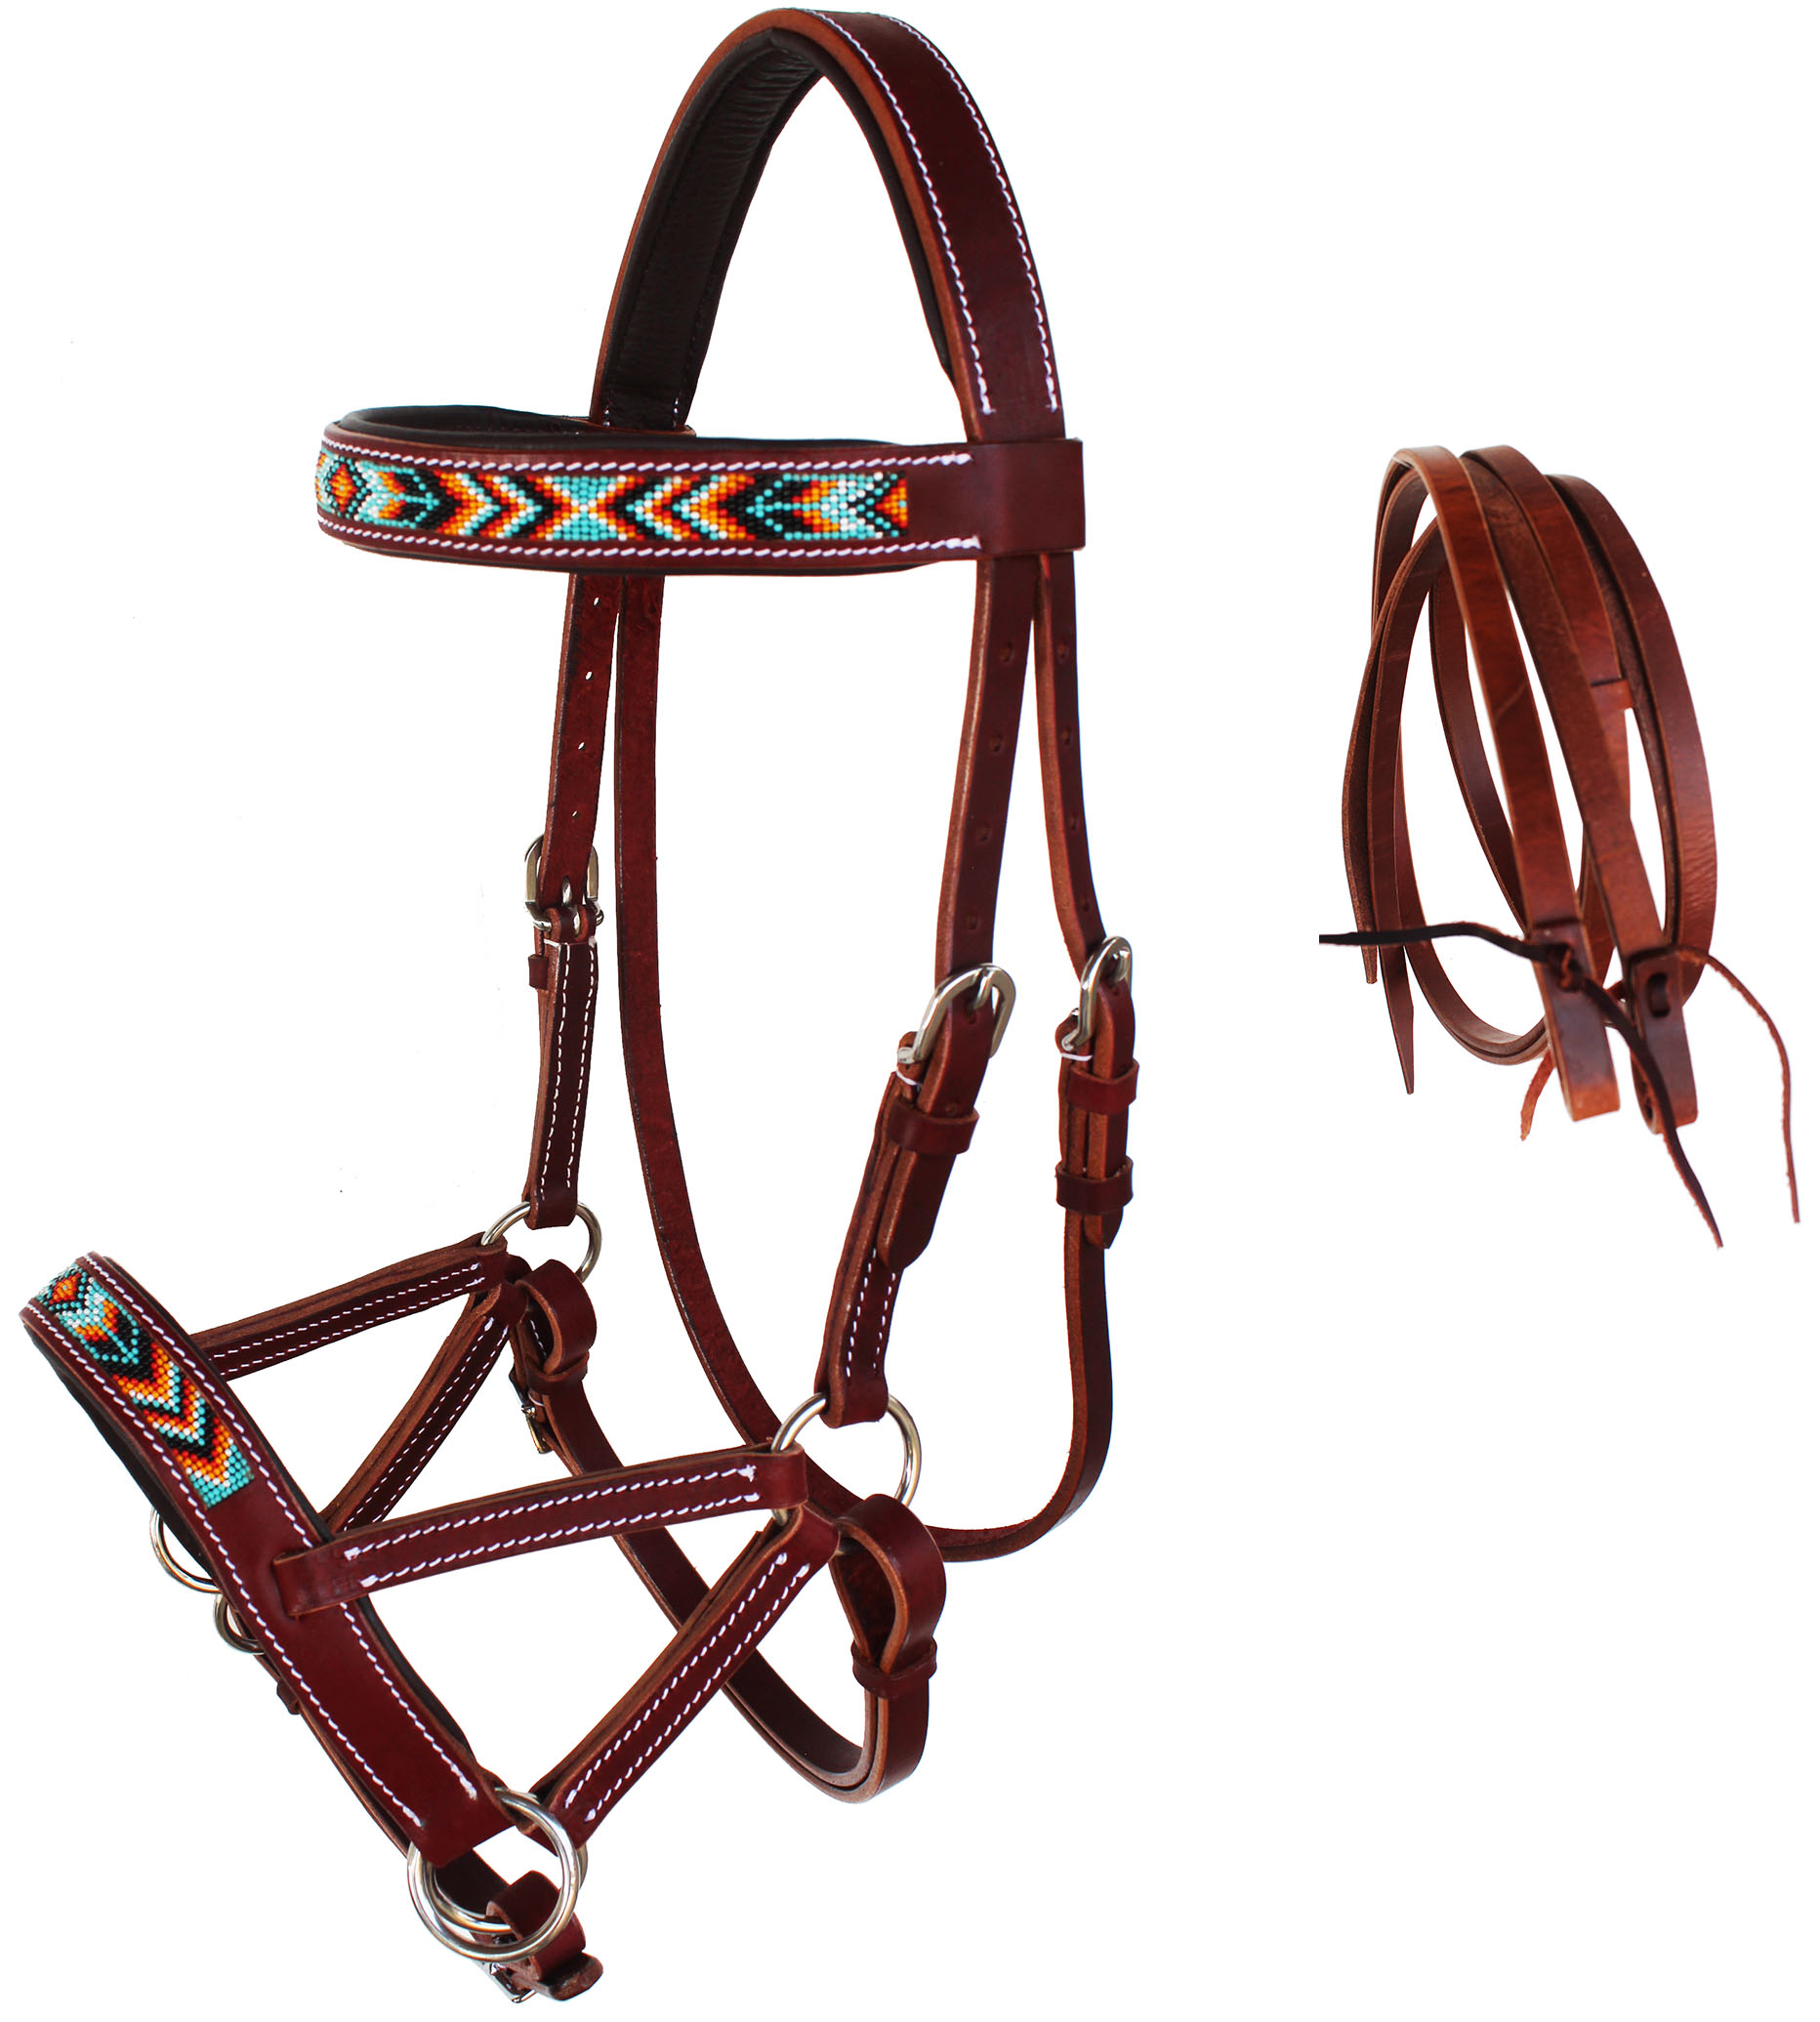 Certified Horse Western Leather Tack Studded Bitless Side pull Bridle Reins USA 